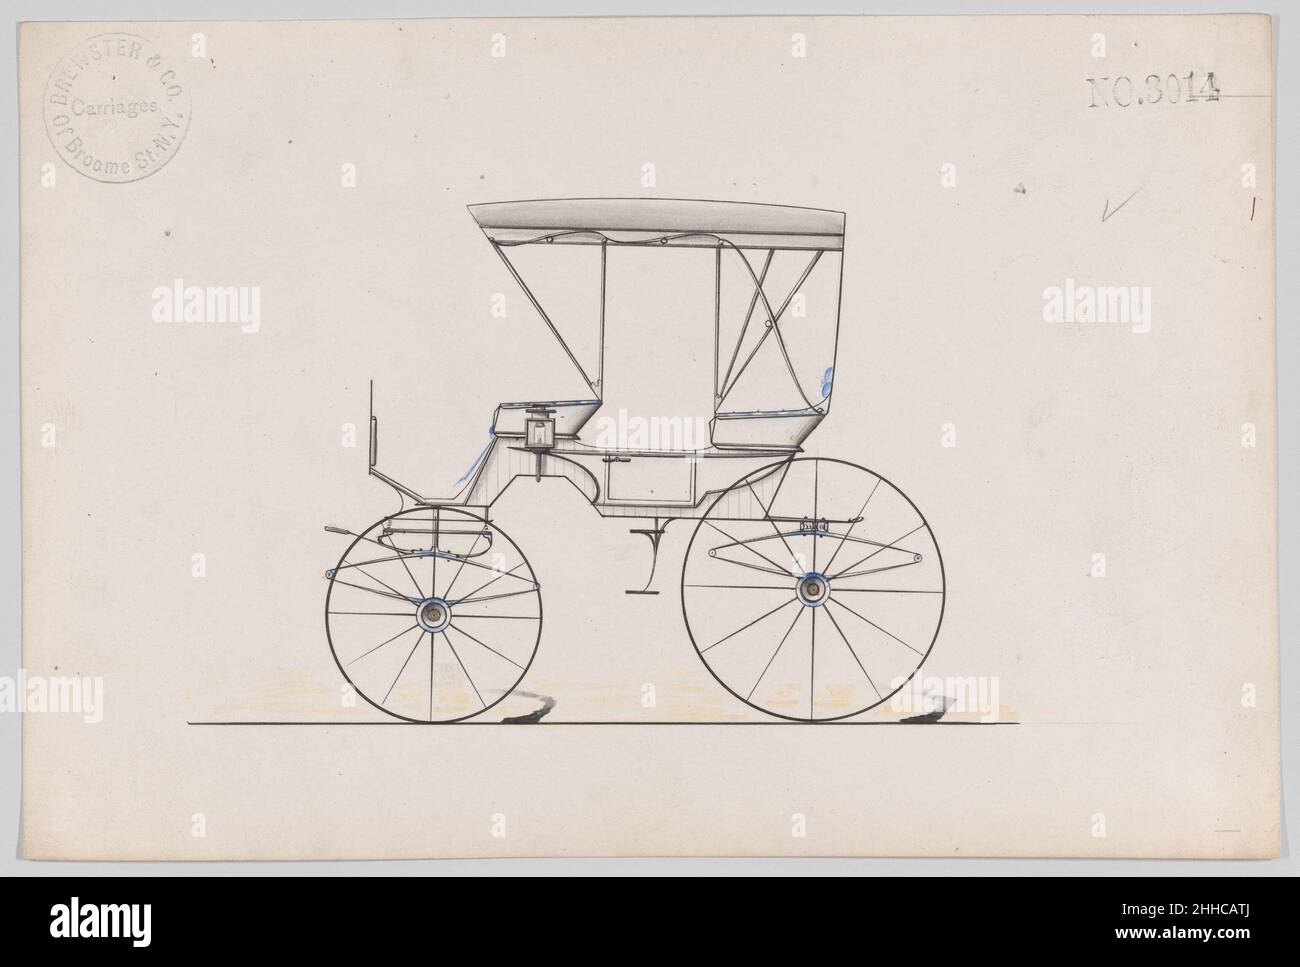 Design for Park Phaeton, no. 3014 1874 Brewster & Co. American Brewster & Company HistoryEstablished in 1810 by James Brewster (1788–1866) in New Haven, Connecticut, Brewster & Company, specialized in the manufacture of fine carriages. The founder opened a New York showroom in 1827 at 53-54 Broad Street, and the company flourished under generations of family leadership. Expansion necessitated moves around lower Manhattan, with name changes reflecting shifts of management–James Brewster & Sons operated at 25 Canal Street, James Brewster Sons at 396 Broadway, and Brewster of Broome Street was ba Stock Photo